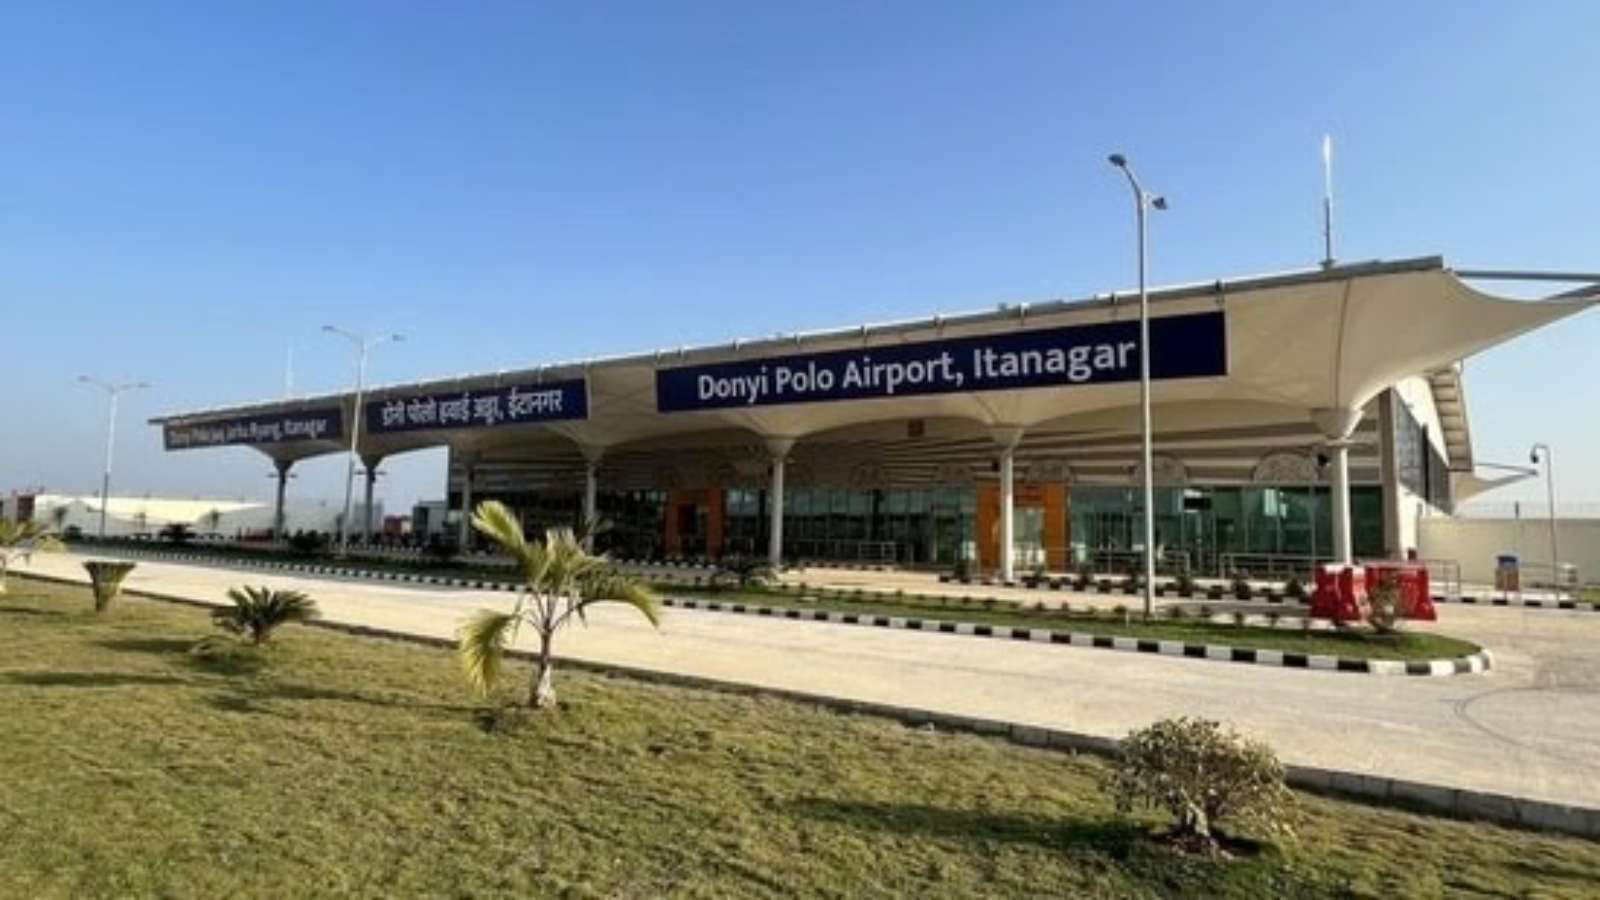 Donyi Polo Airport: Passenger Amenities, Connectivity and Fight details